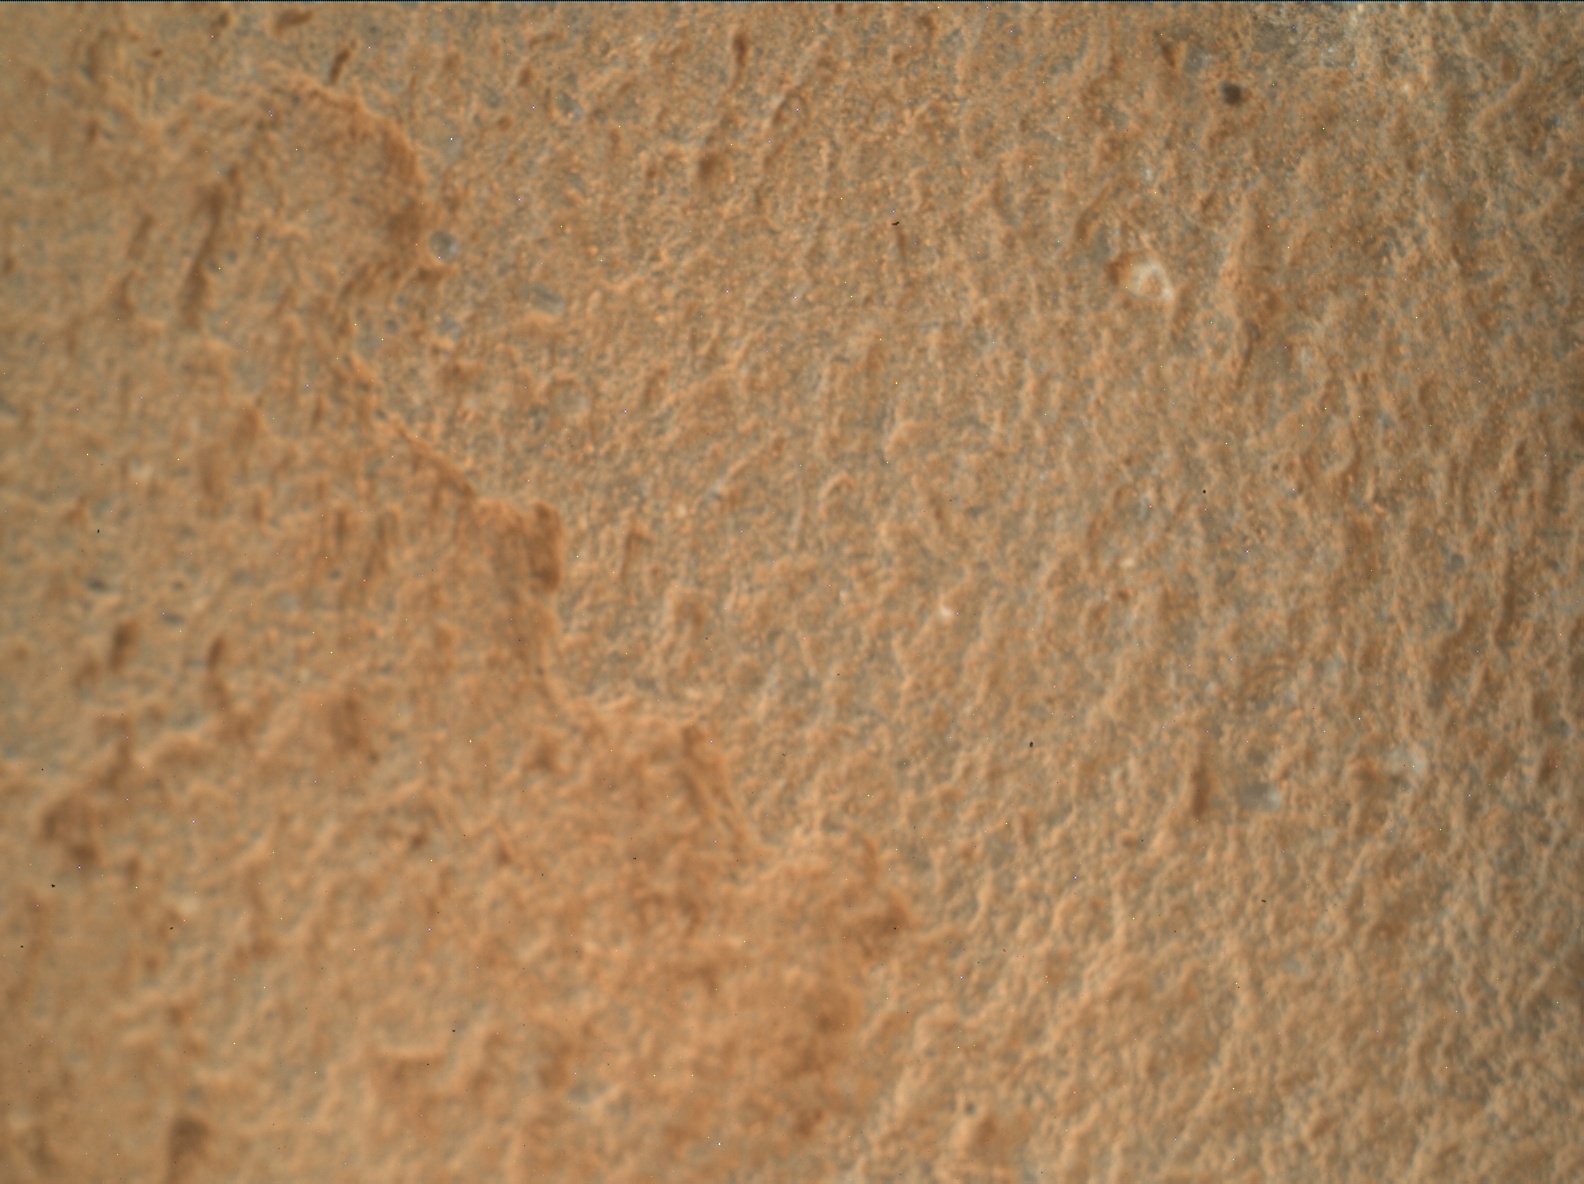 Nasa's Mars rover Curiosity acquired this image using its Mars Hand Lens Imager (MAHLI) on Sol 2696